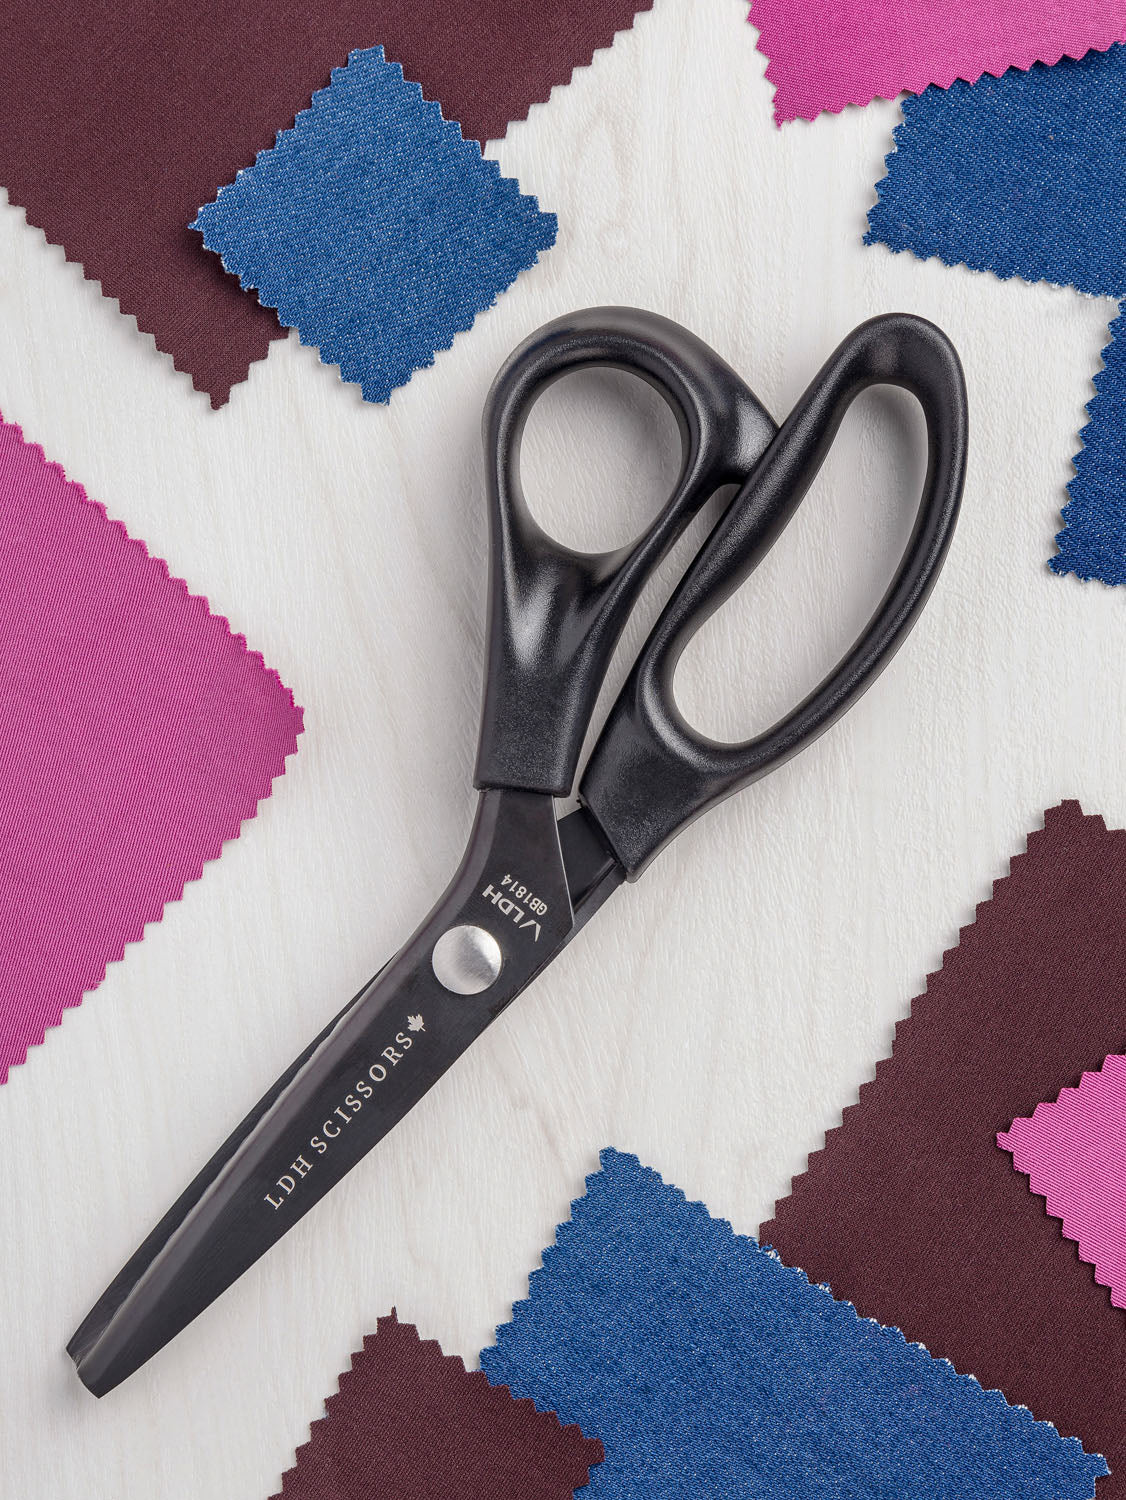 Pinking Shears 101: What Are They? Uses? & How to Use